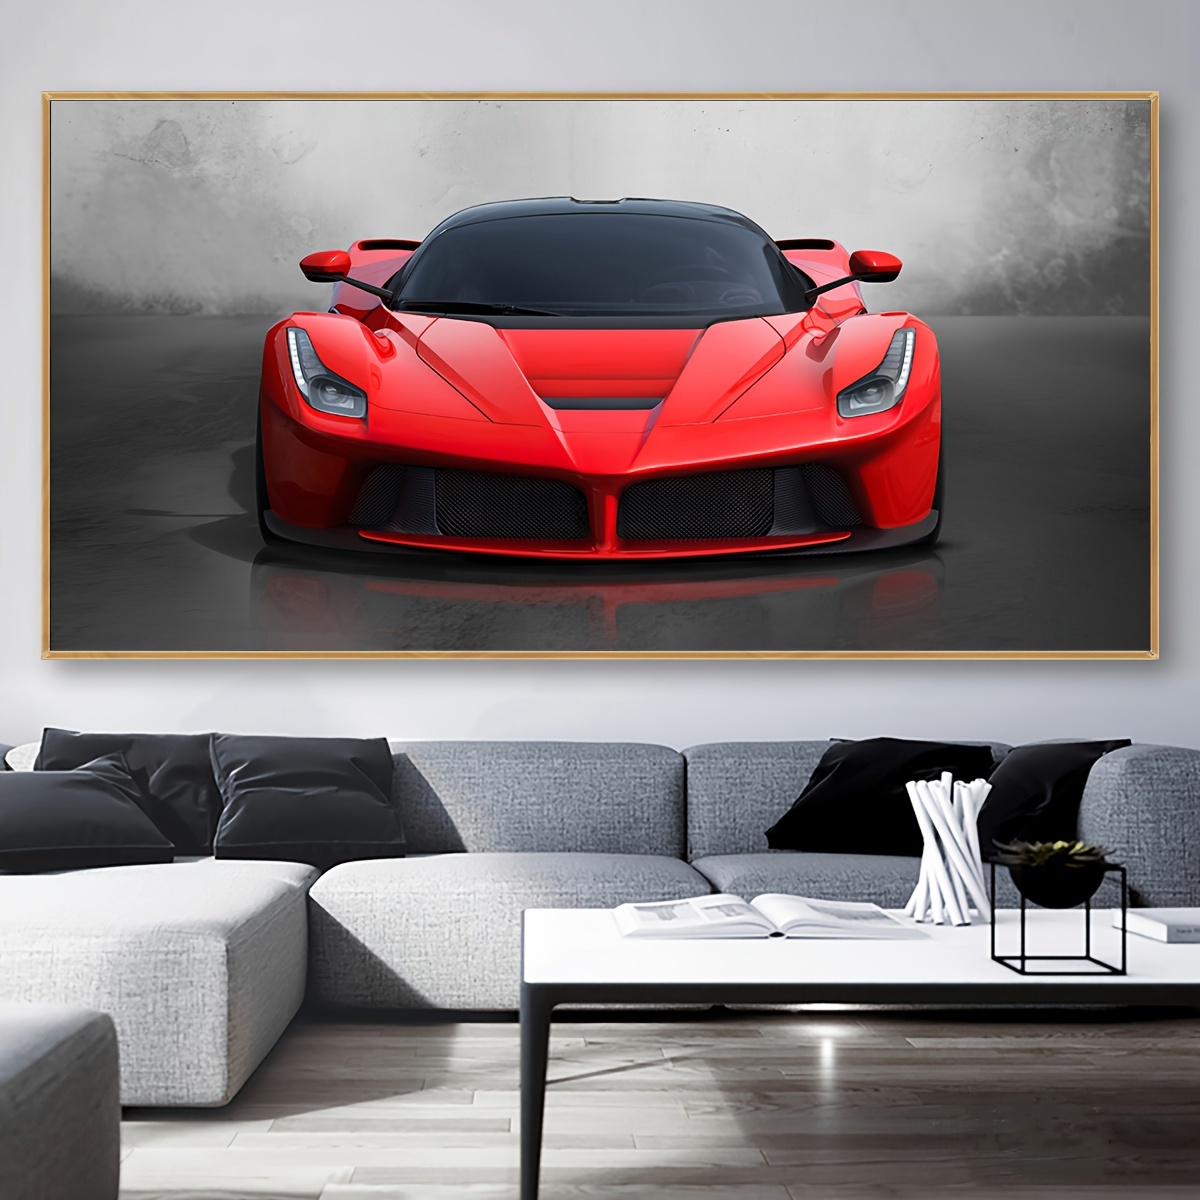 

1pc Unframed Canvas Poster, Modern Art, Vehicle Cool Car, Ideal Gift For Bedroom Living Room Corridor, Wall Art, Wall Decor, Winter Decor, Room Decoration